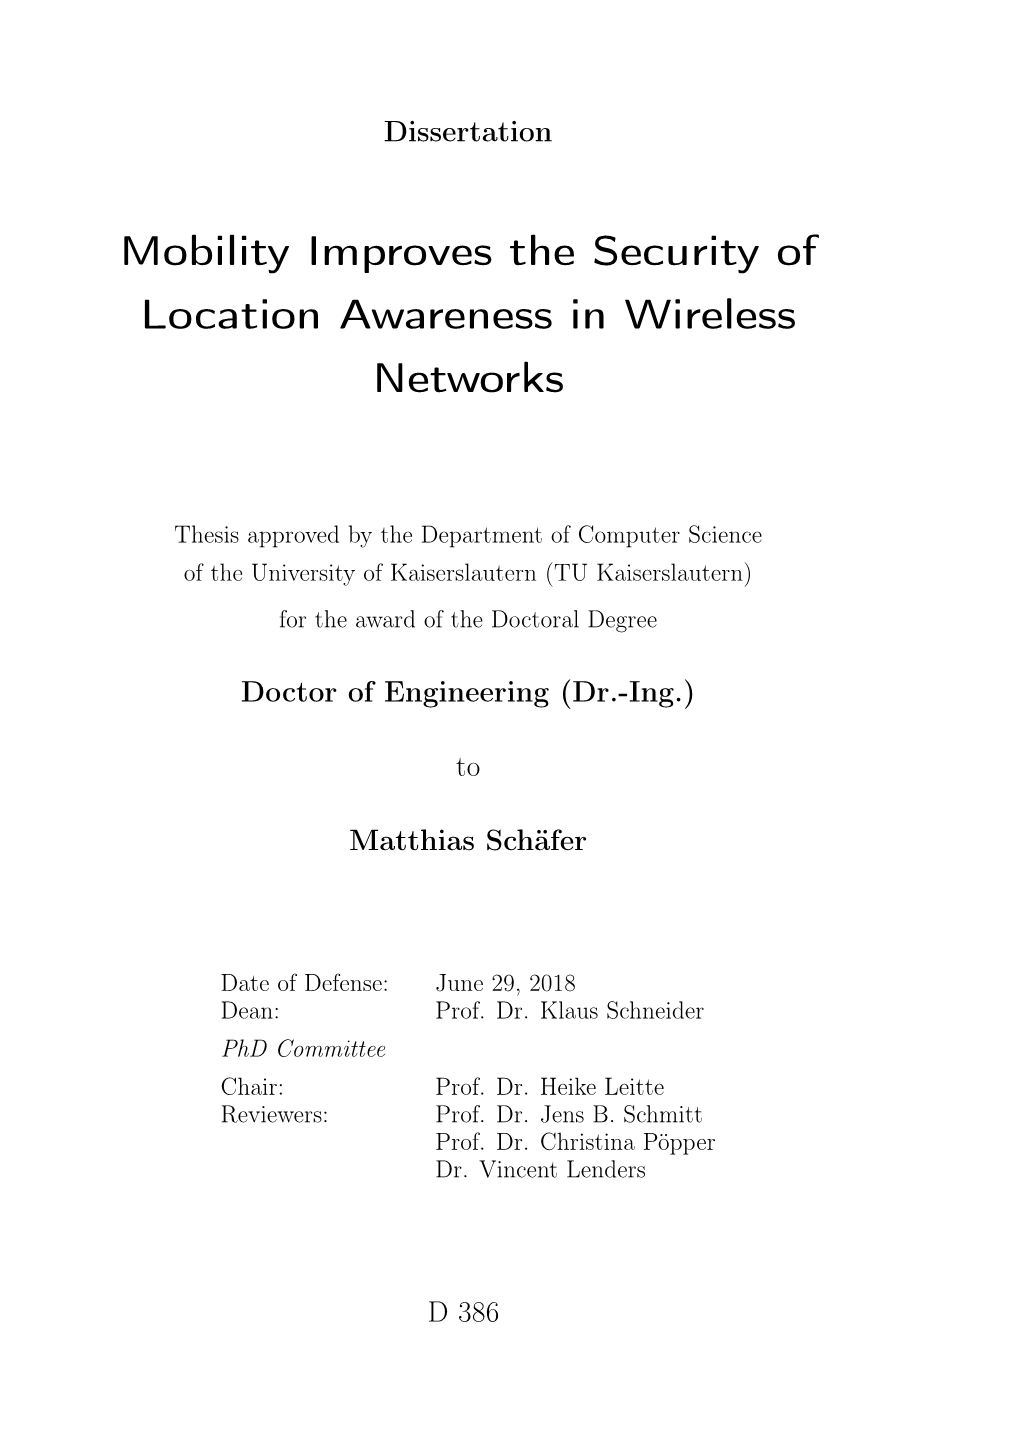 Mobility Improves the Security of Location Awareness in Wireless Networks